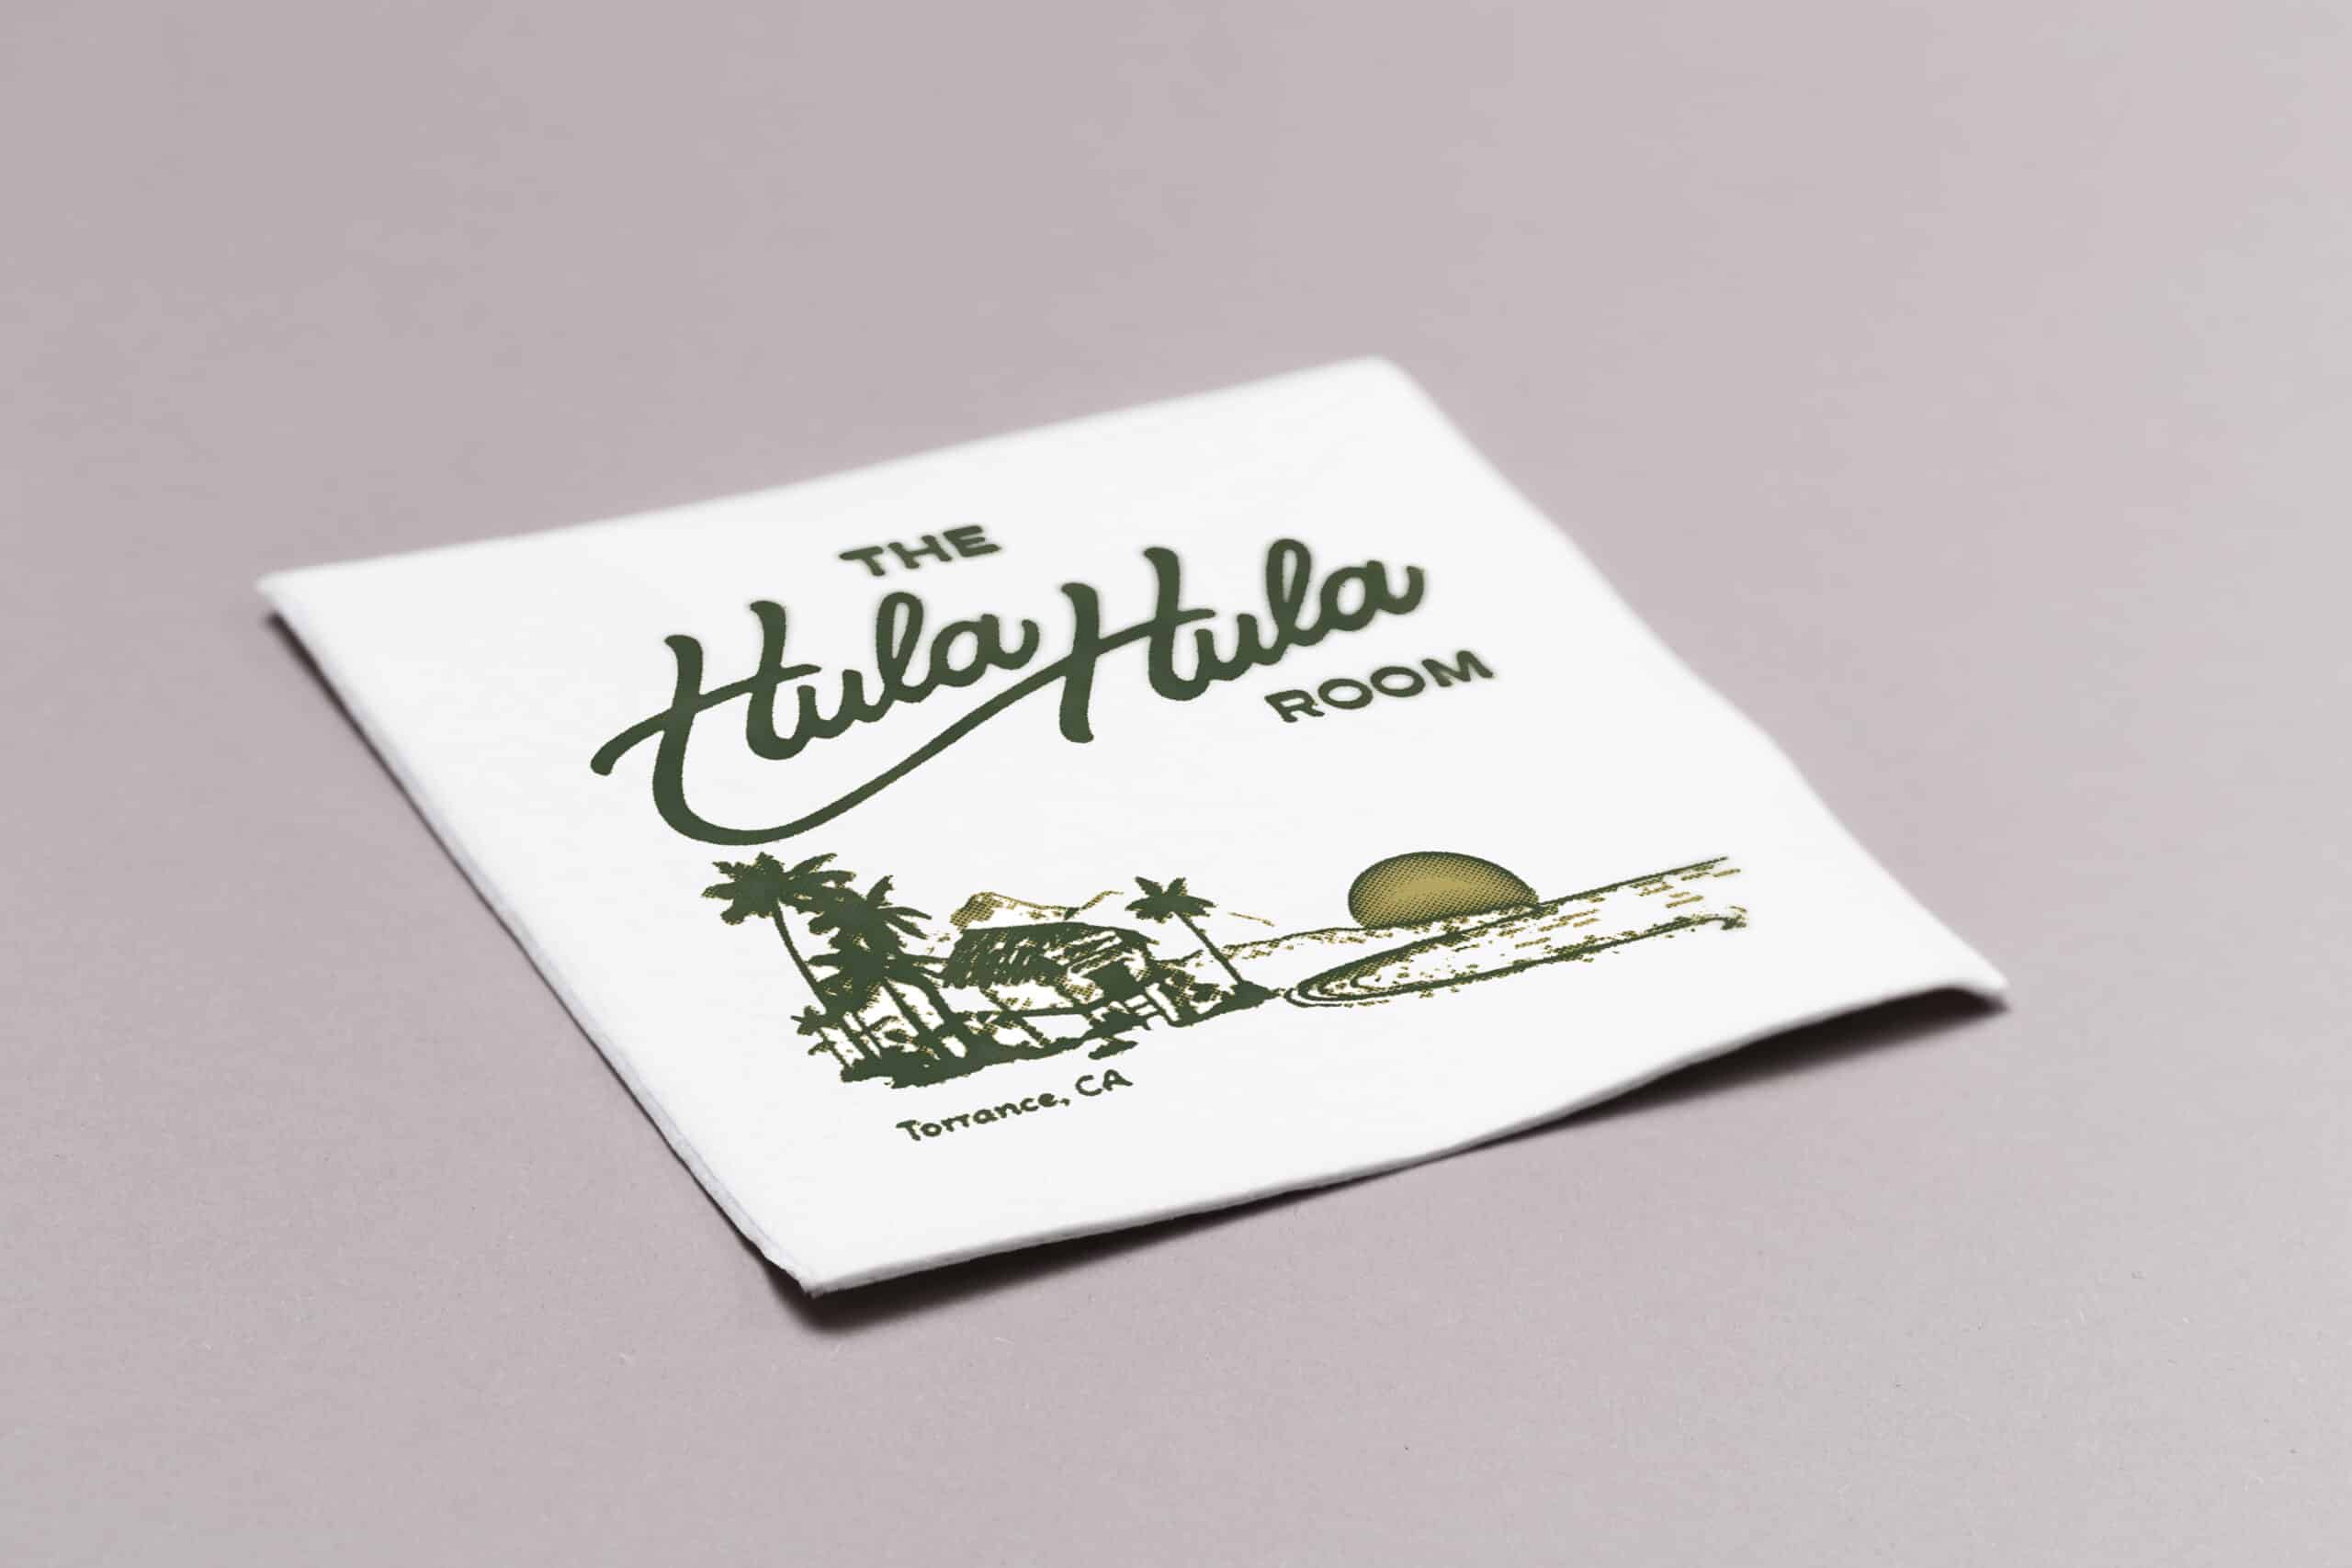 Cocktail Napkins for The Hula Hula Room Tiki Bar in Torrance California designed by Stellen Design logo design and branding agency in Los Angeles California specializing in logo design for hospitality brands